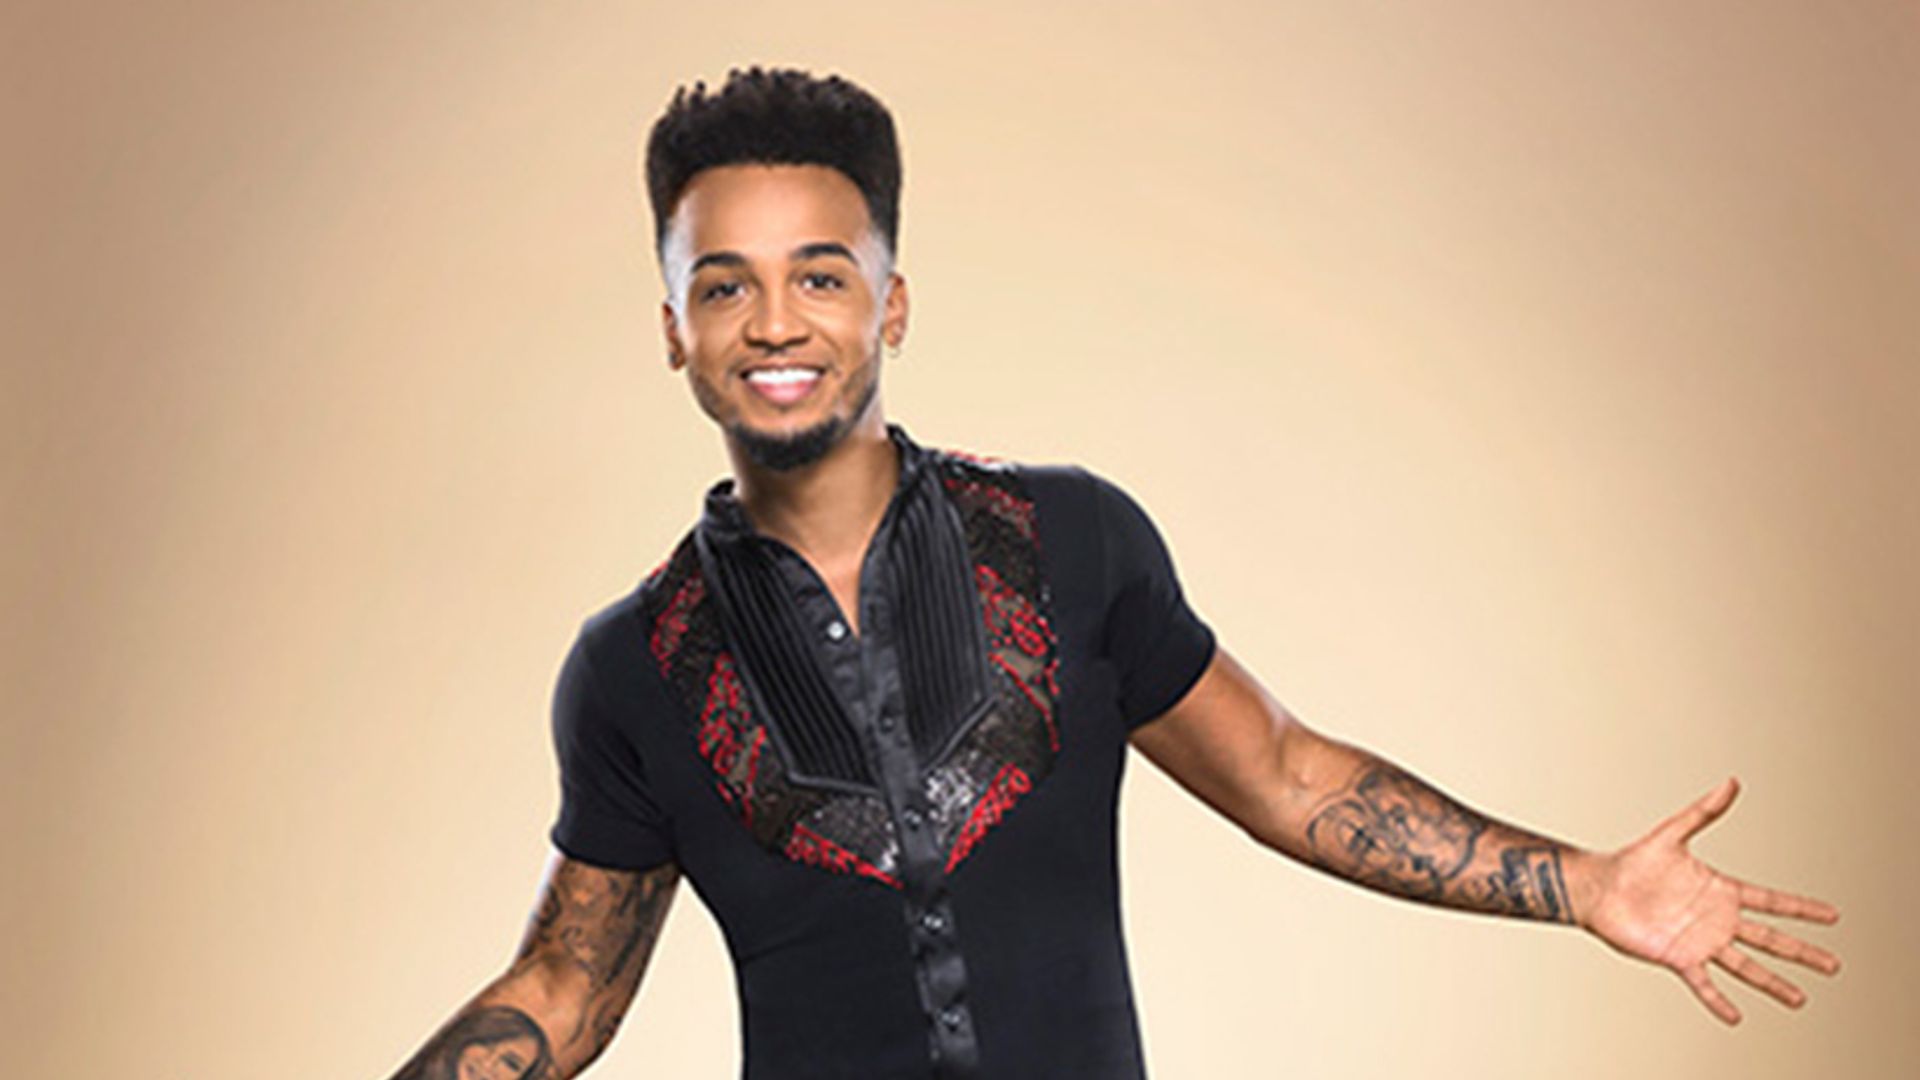 Aston Merrygold opens up about expecting first child